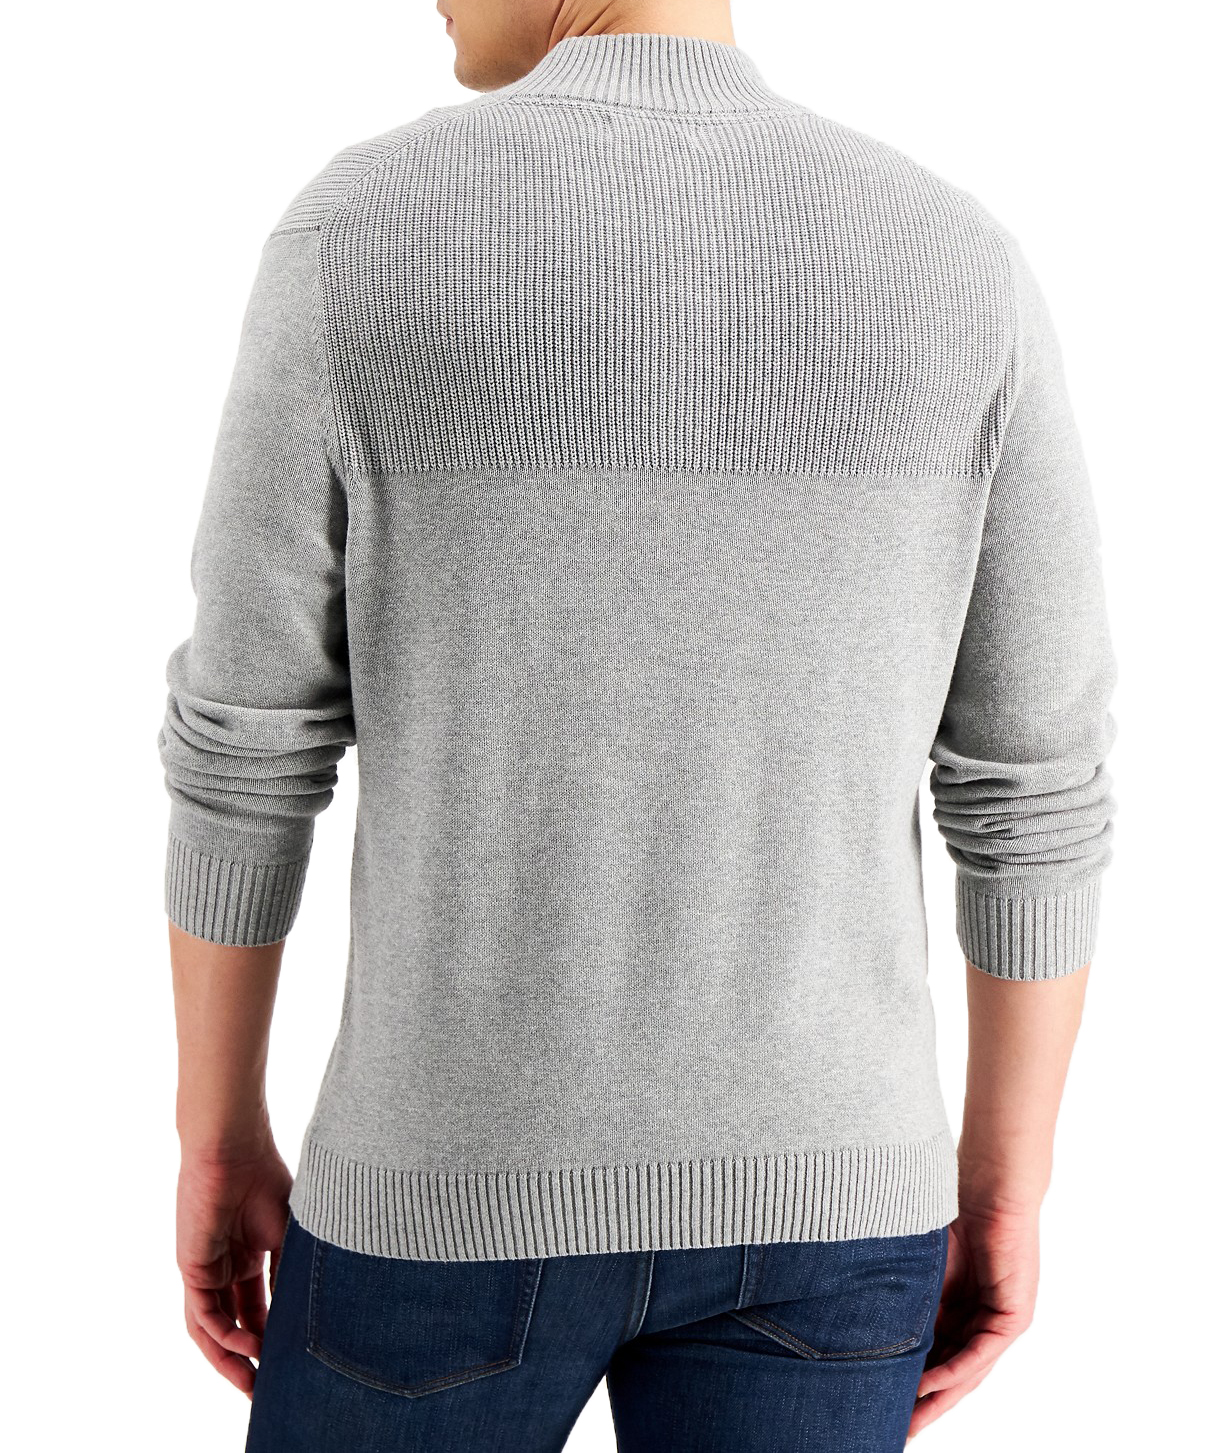 woocommerce-673321-2209615.cloudwaysapps.com-club-room-mens-grey-ribbed-four-button-sweater